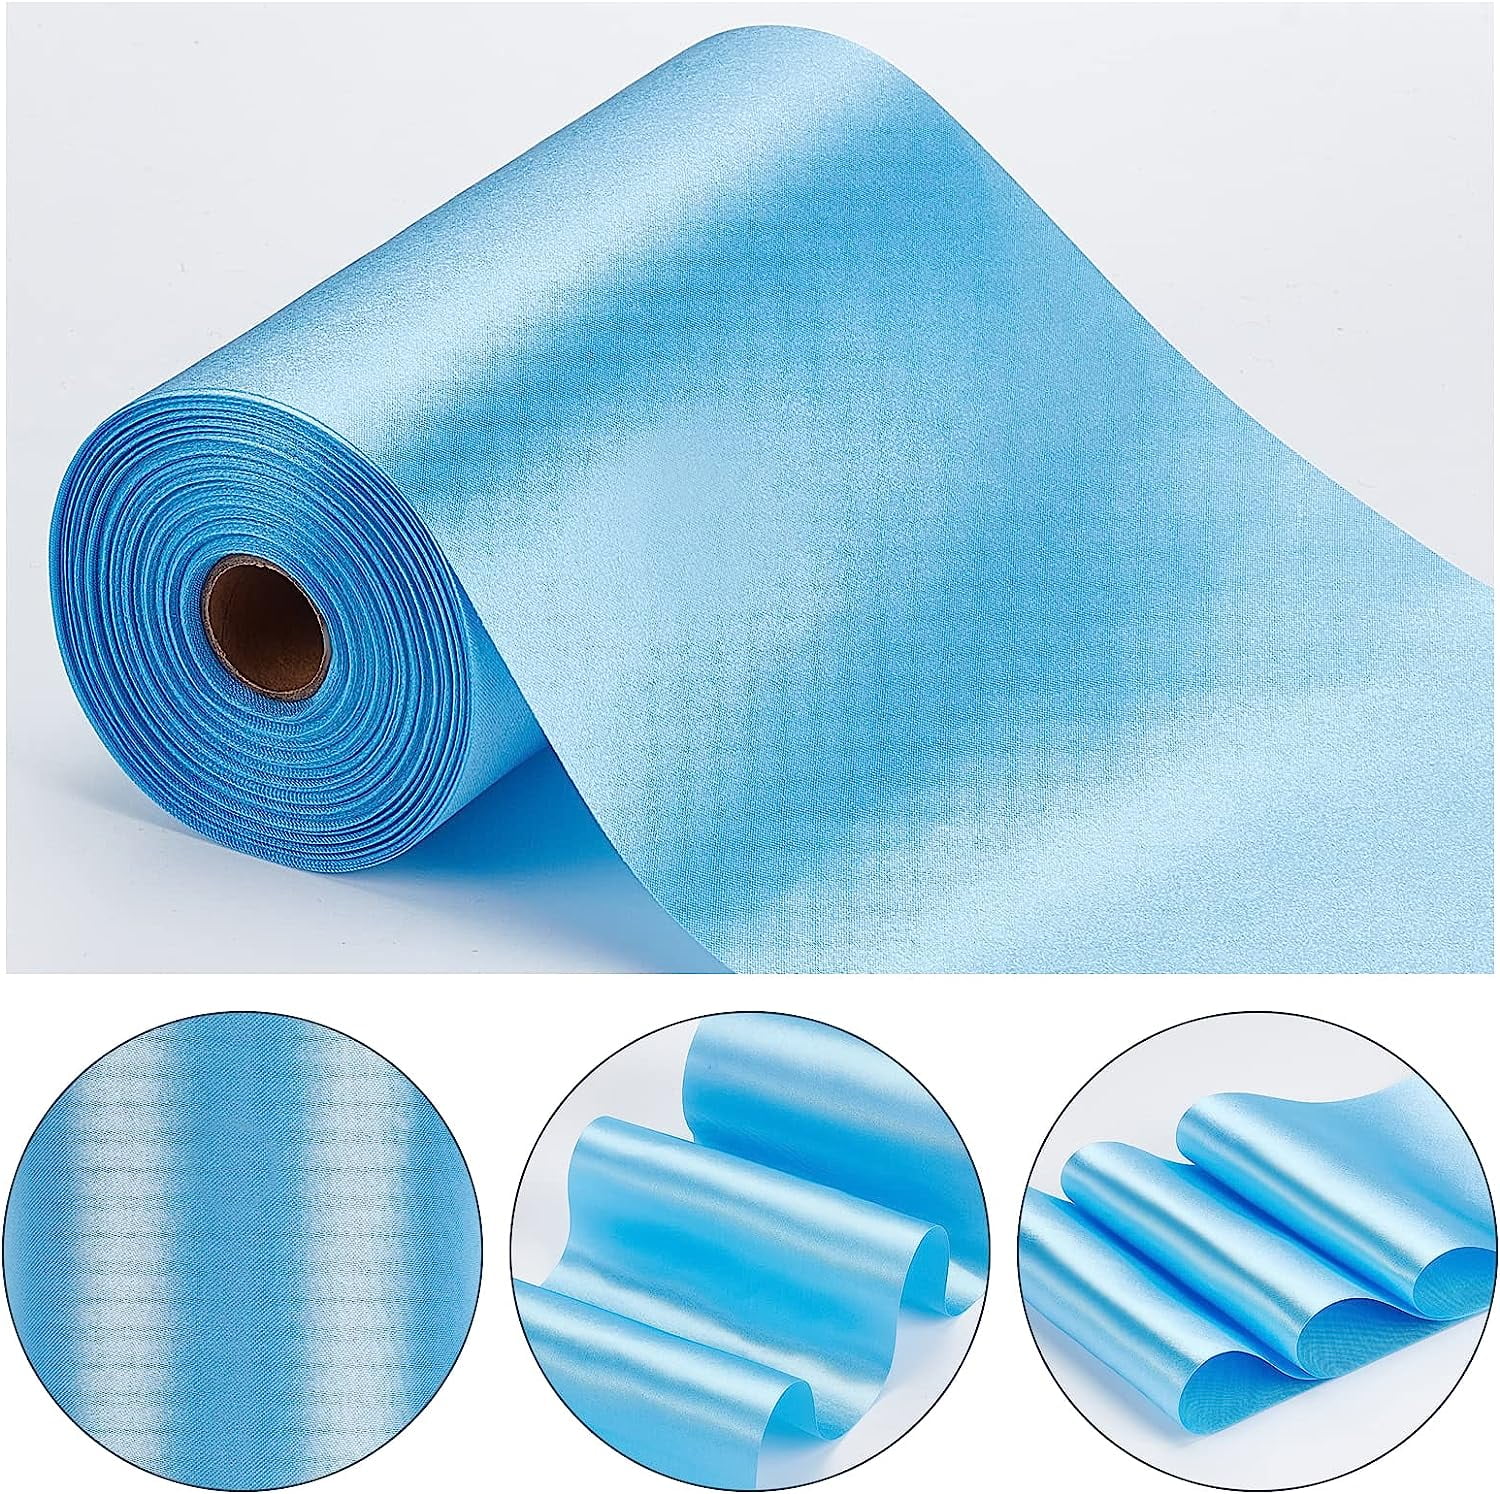 YASEO Baby Sky Blue Ribbon, Solid Color Double Faced Polyester Satin Ribbon  - 1 1/2 Inch Wide, 100 Yards Long, Perfect for Wedding, Gift Wrapping